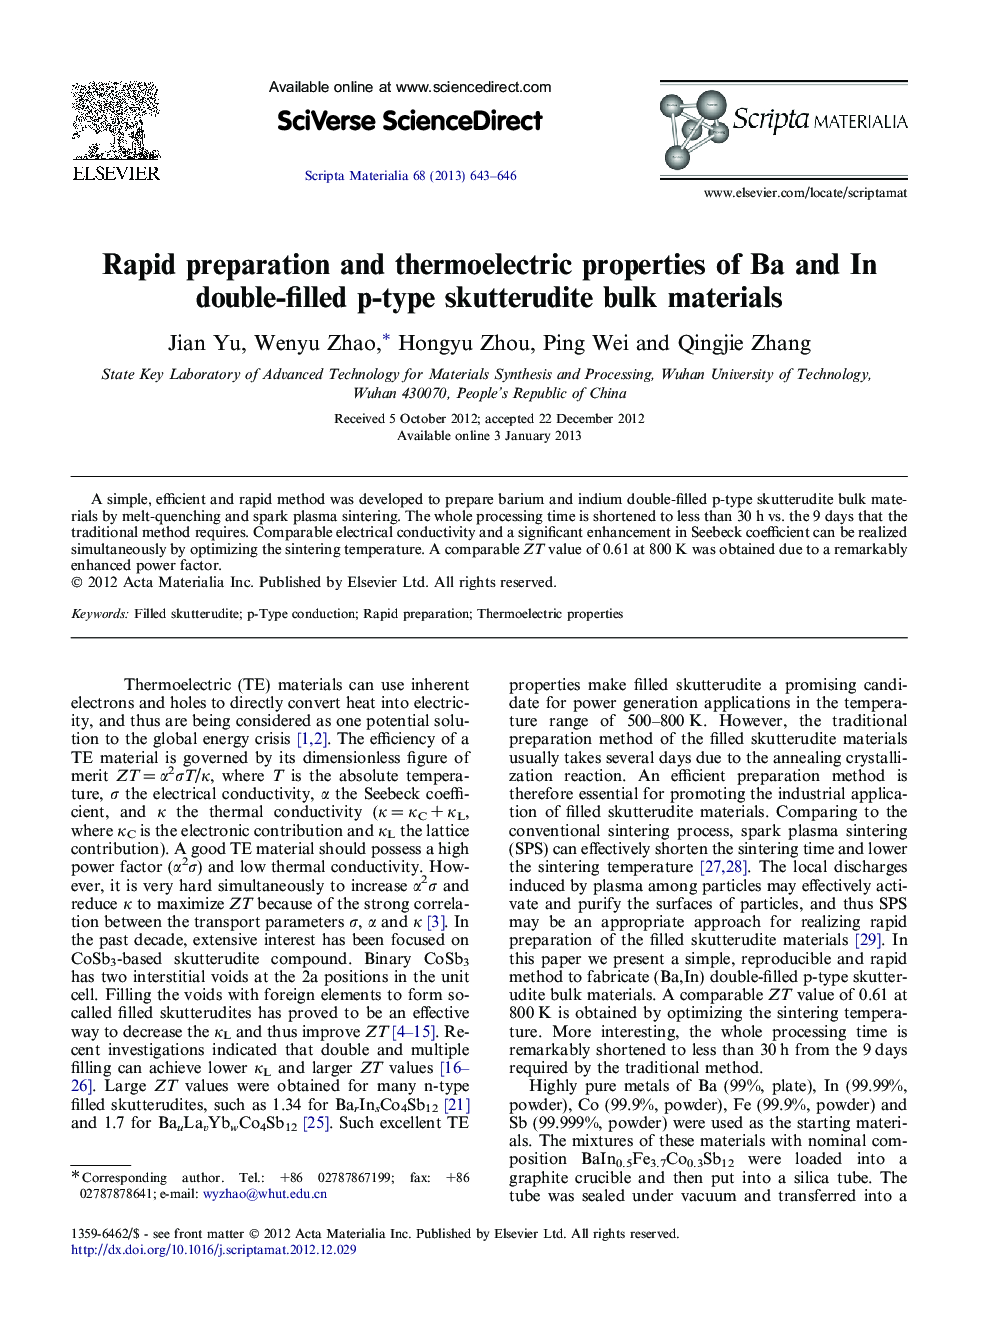 Rapid preparation and thermoelectric properties of Ba and In double-filled p-type skutterudite bulk materials